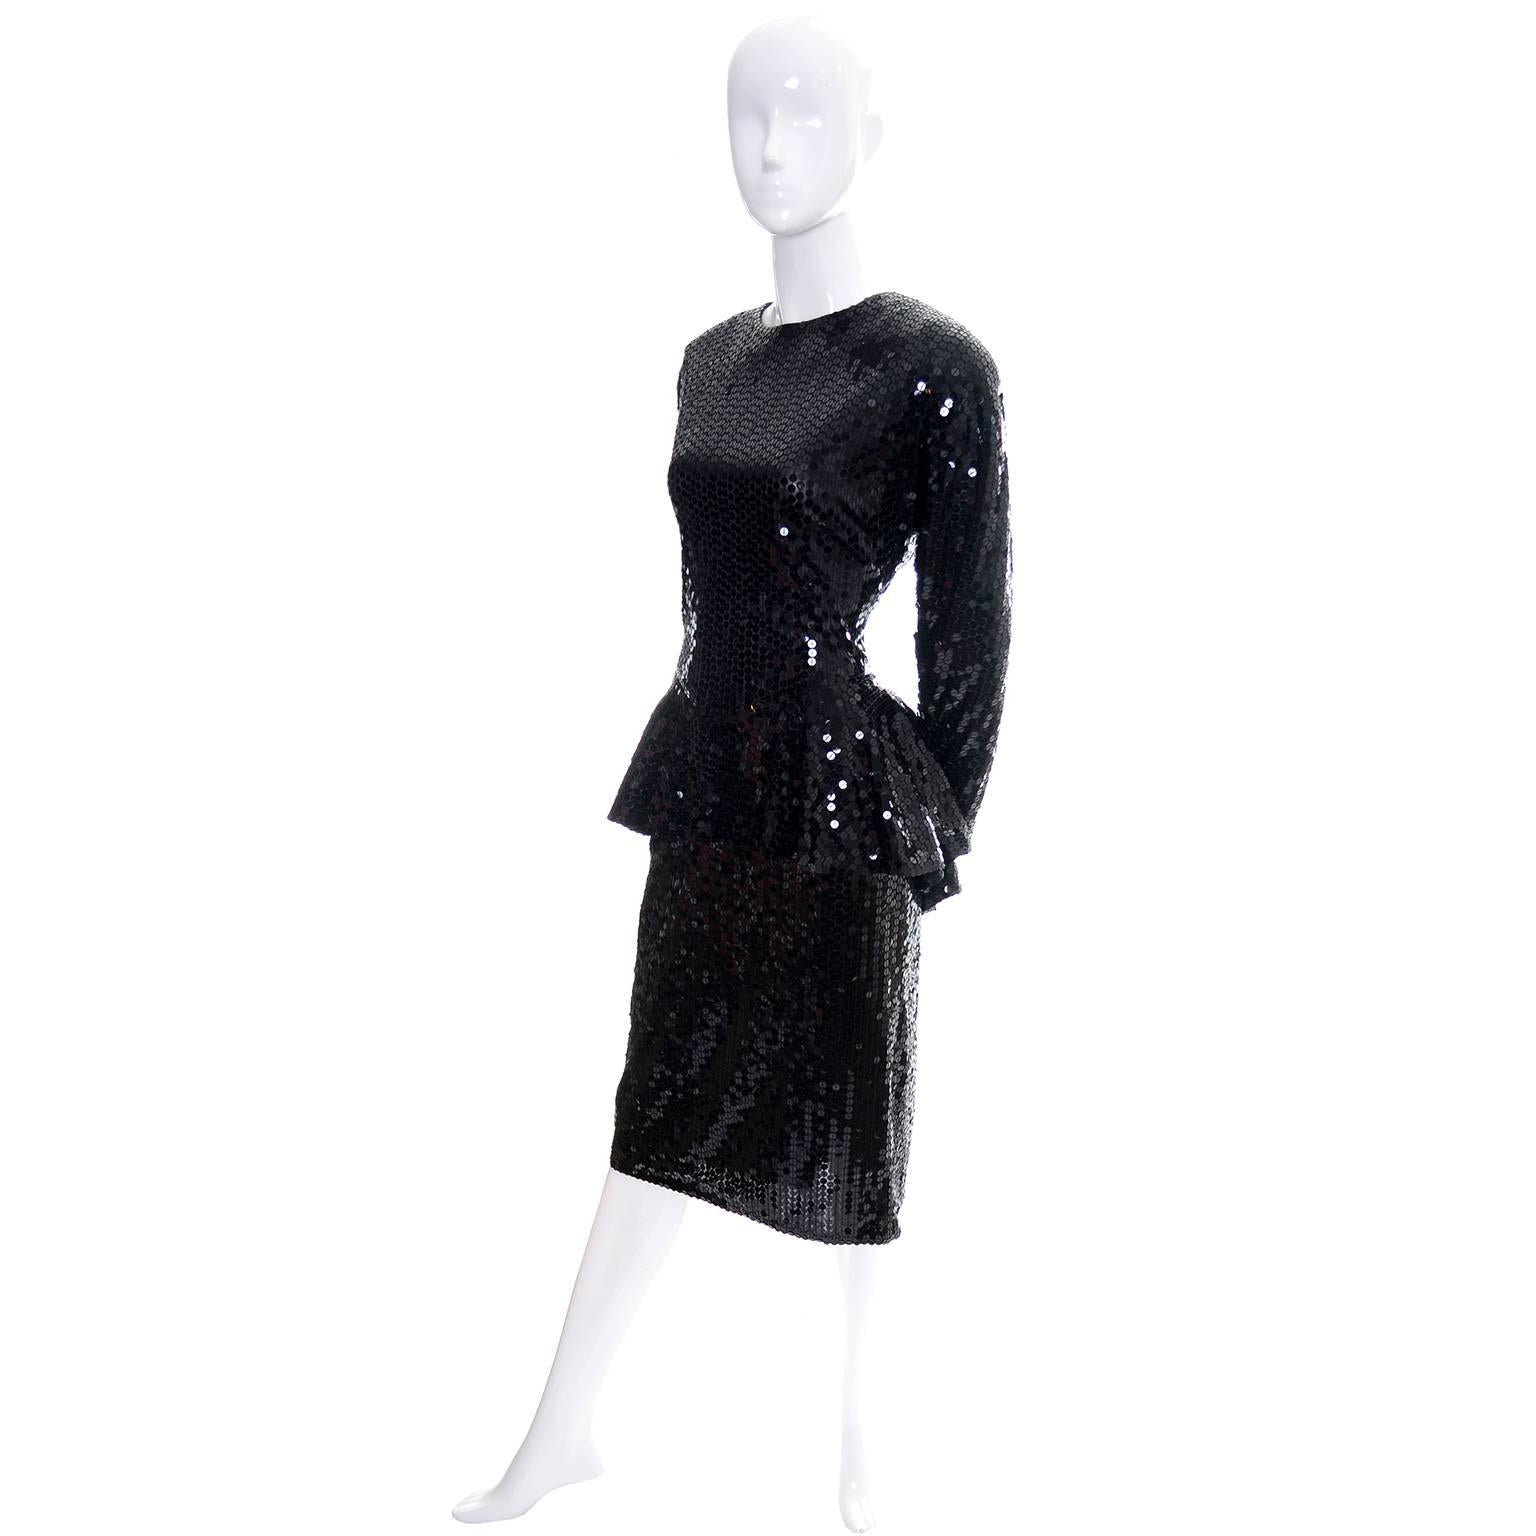 Women's 1980s Lillie Rubin Vintage Dress With Peplum in Black With Sequins